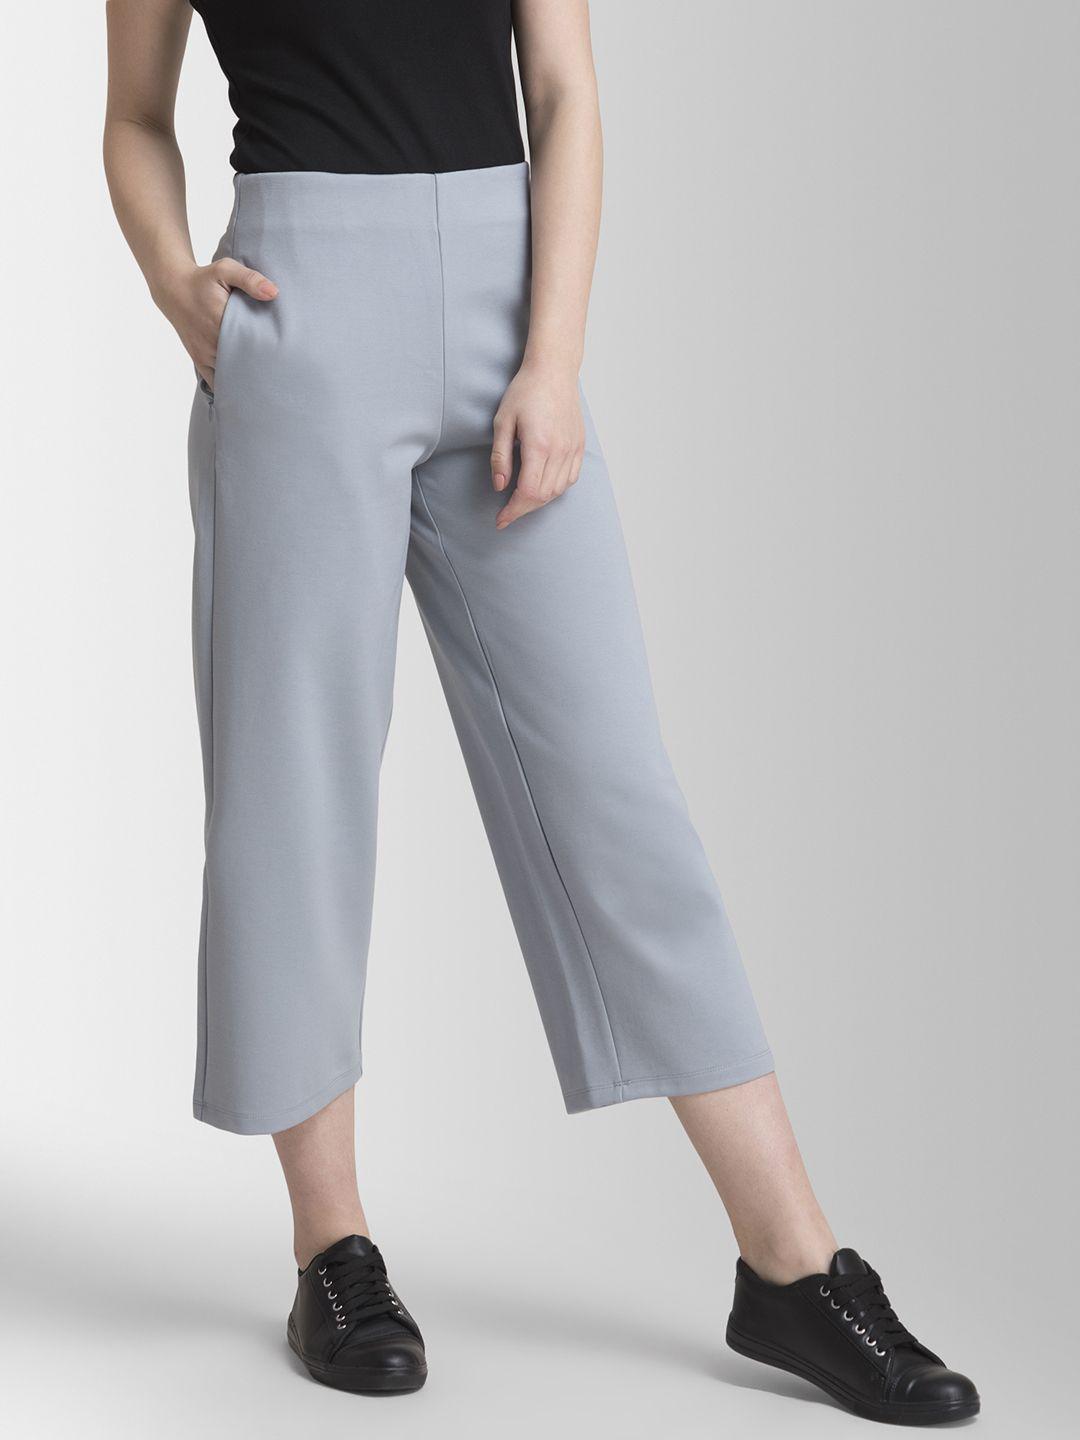 fablestreet-women-grey-loose-fit-solid-culottes